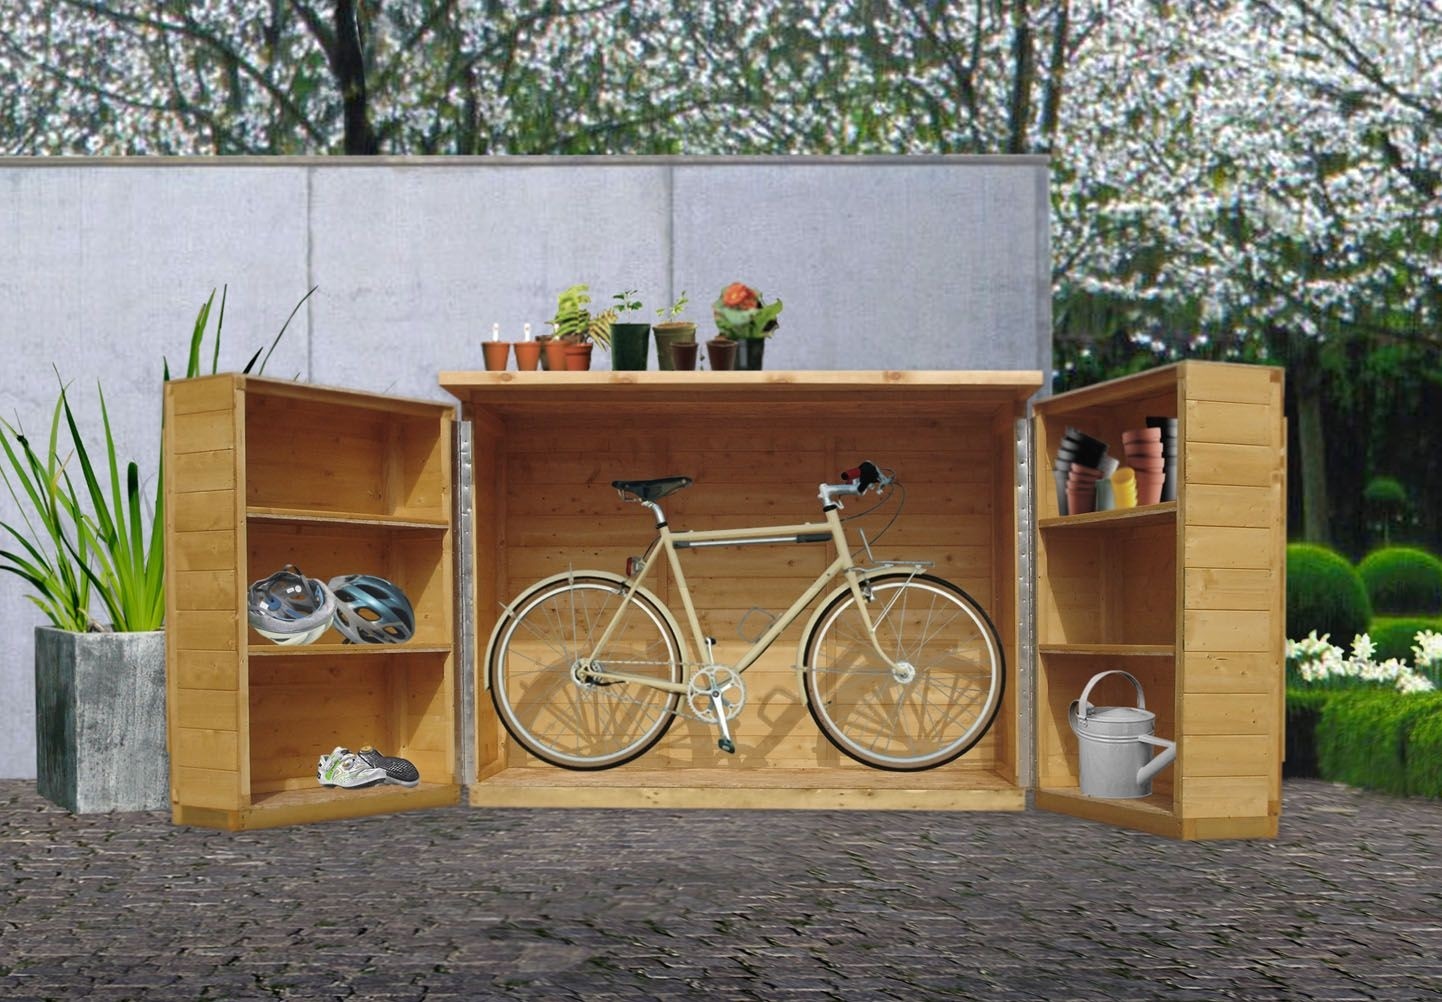 Shackup bikeinabox shed for your ride is a waist height